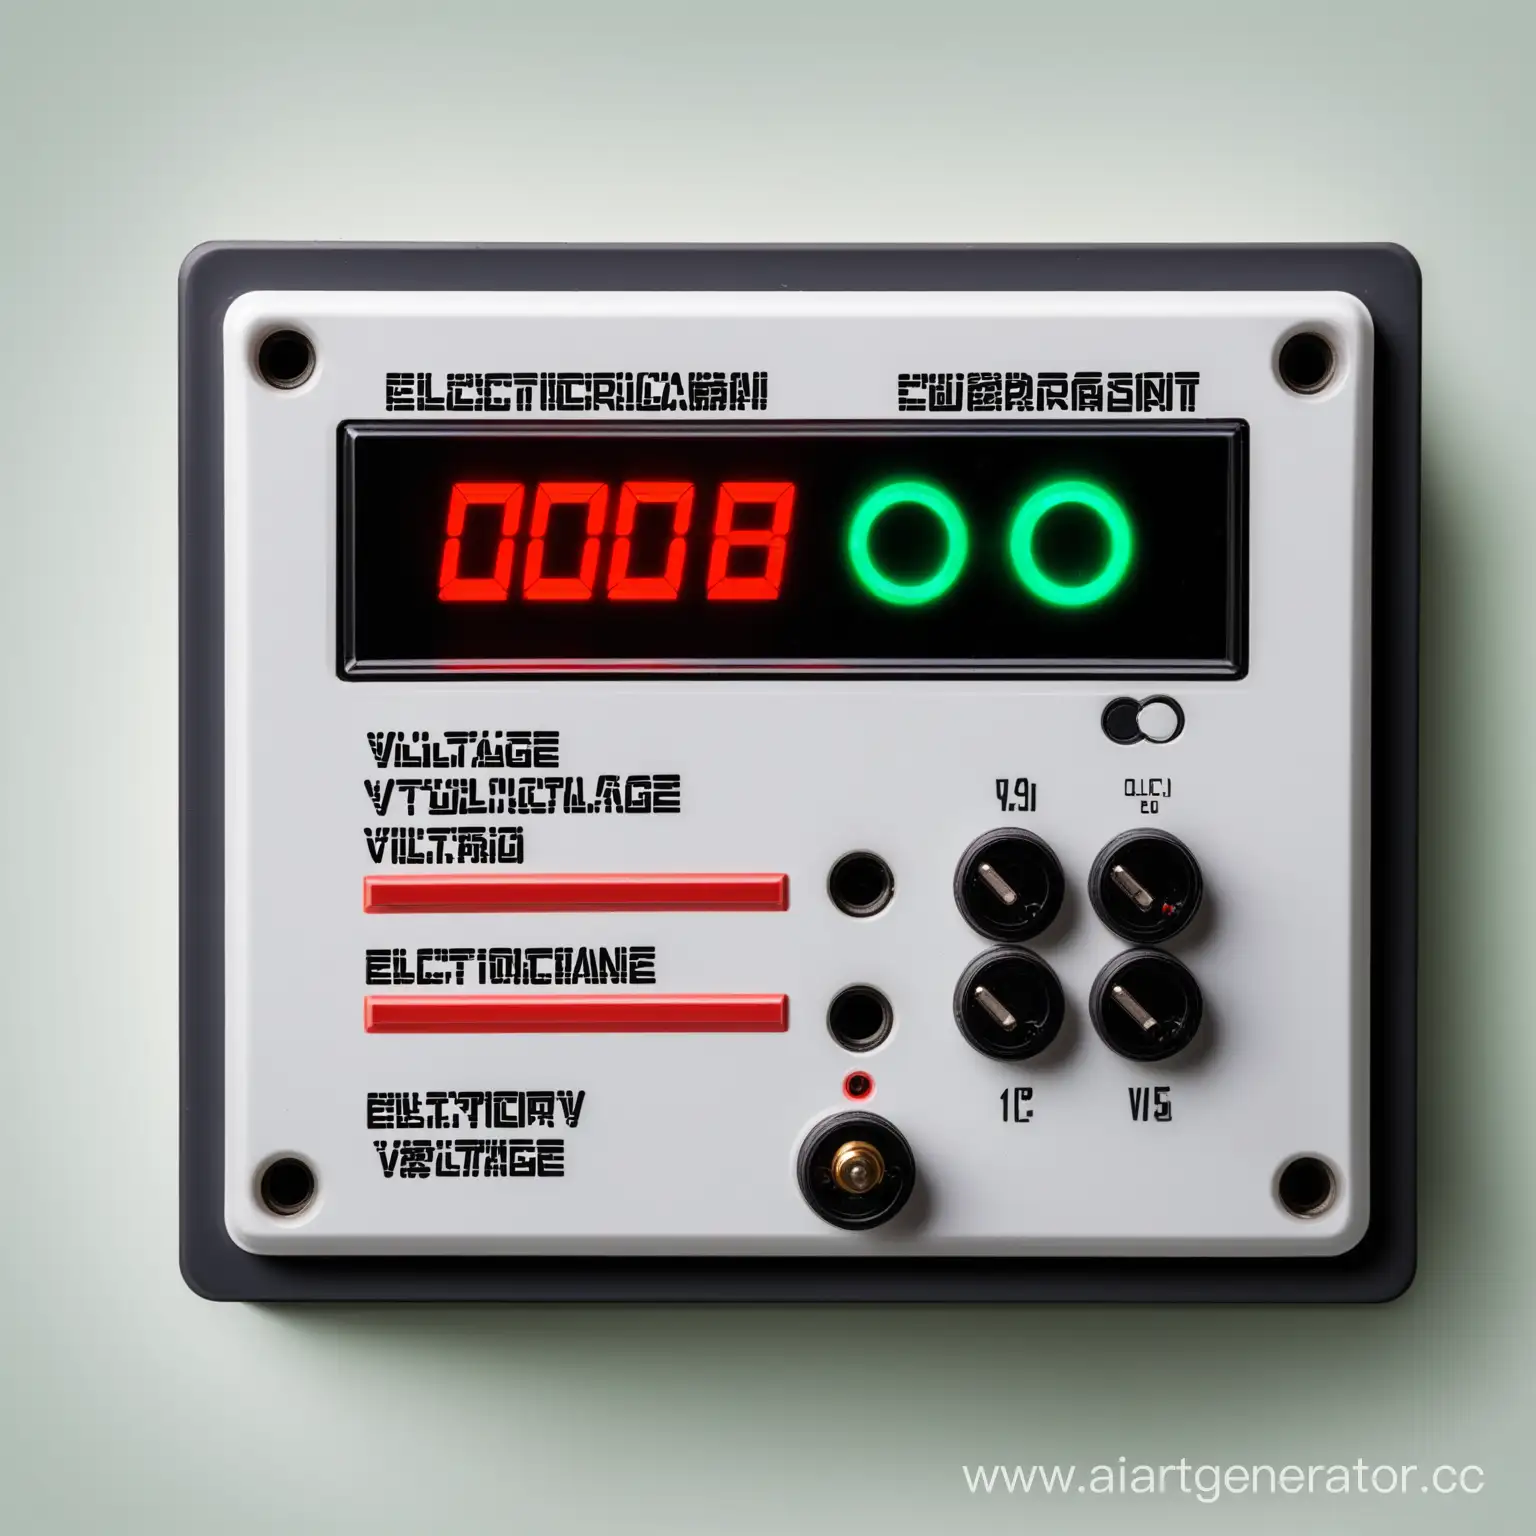 Electrician-Assessing-Voltage-with-Indicator-in-Industrial-Electricity-Panel